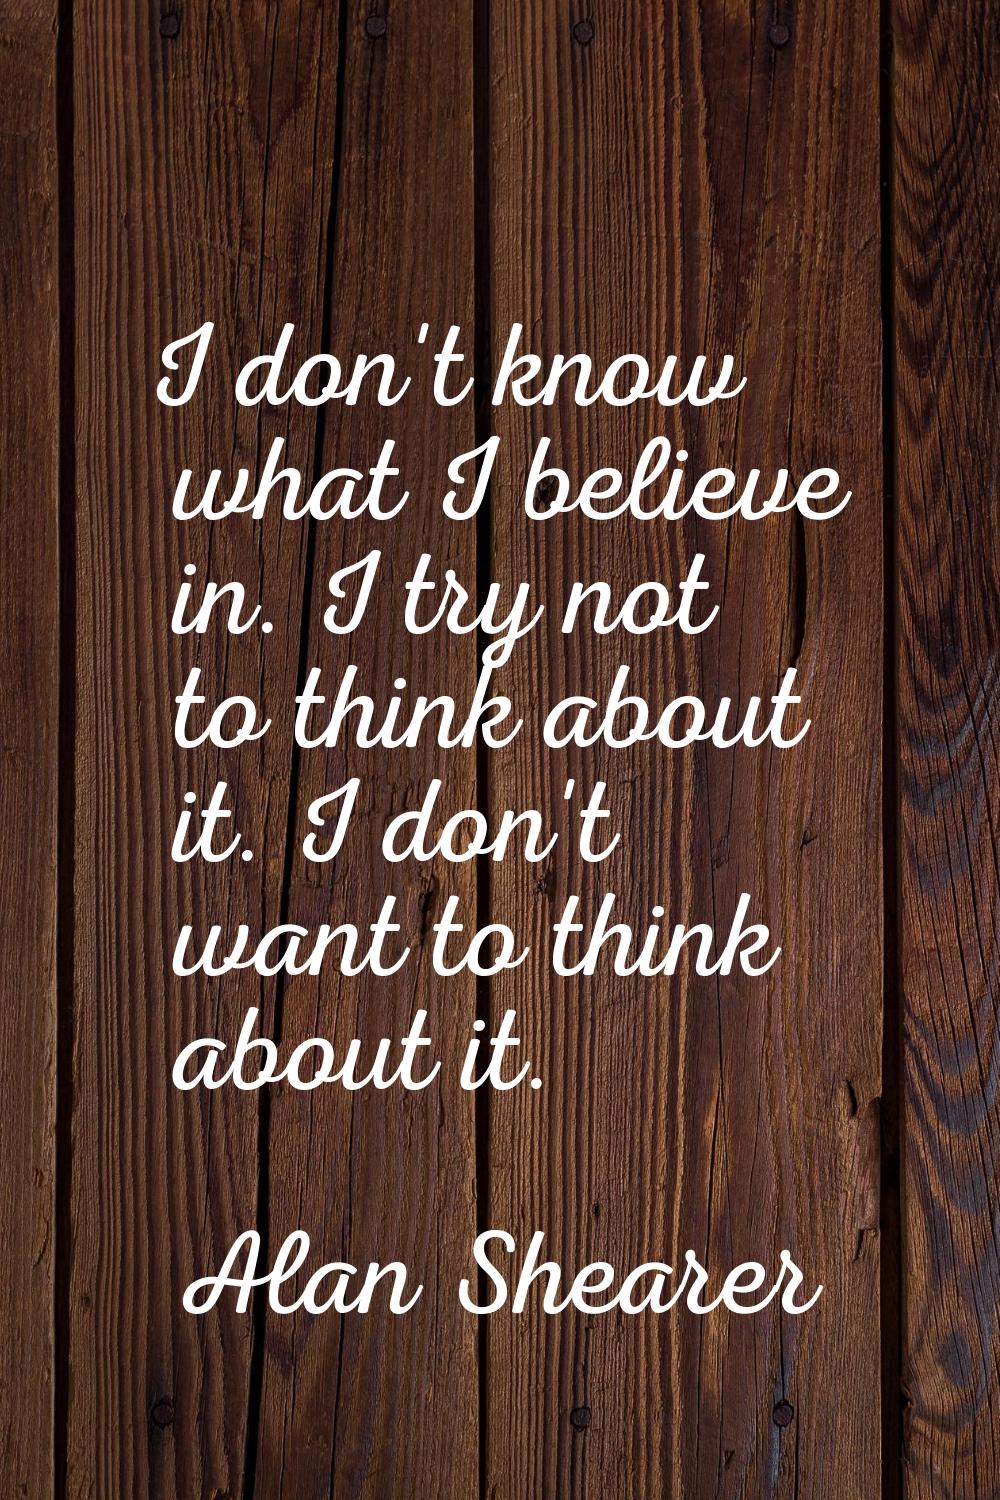 I don't know what I believe in. I try not to think about it. I don't want to think about it.